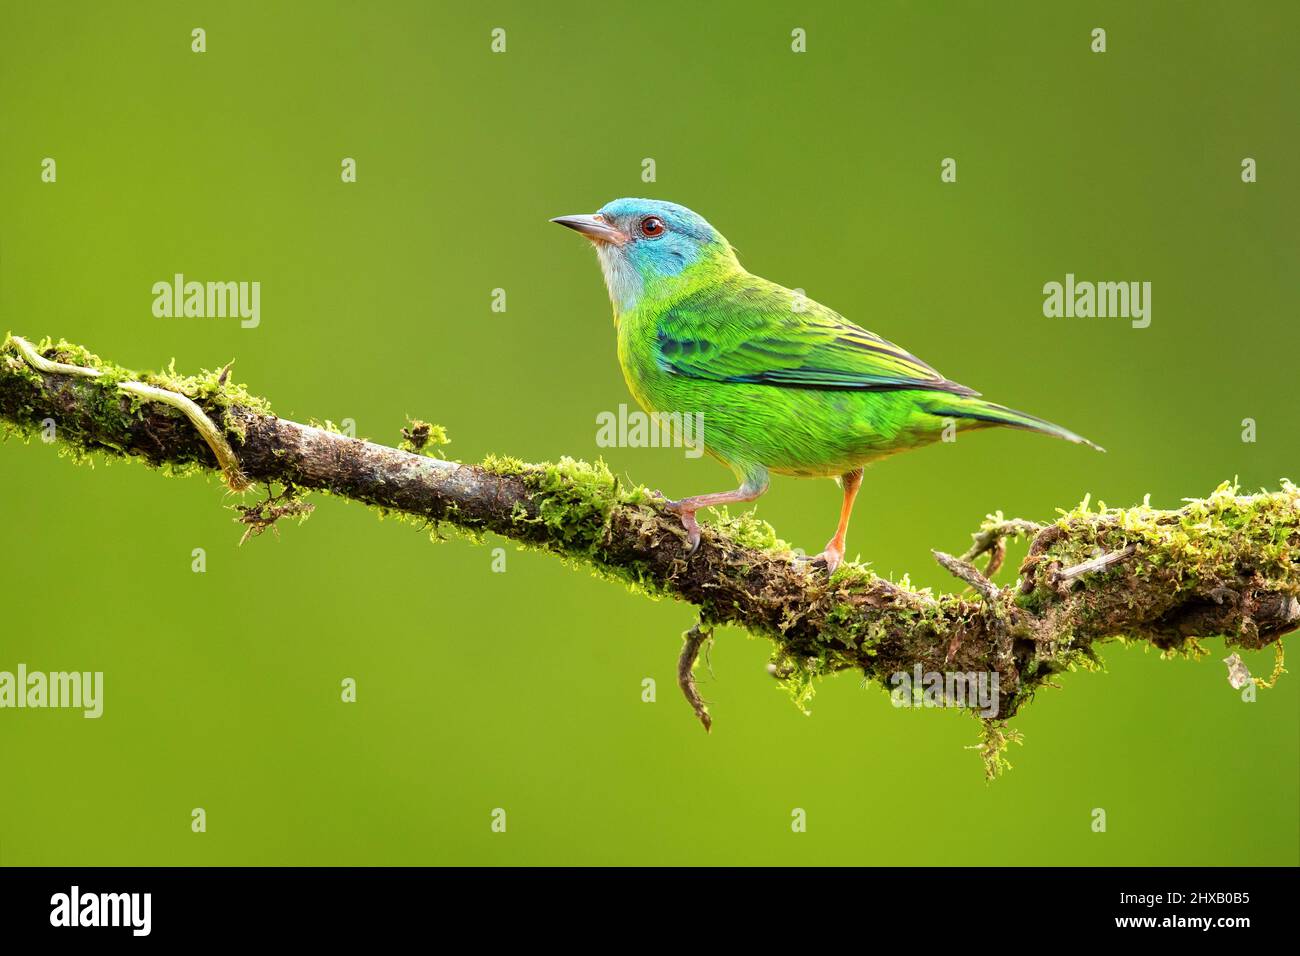 The blue dacnis or turquoise honeycreeper (Dacnis cayana) is a small passerine bird. Stock Photo